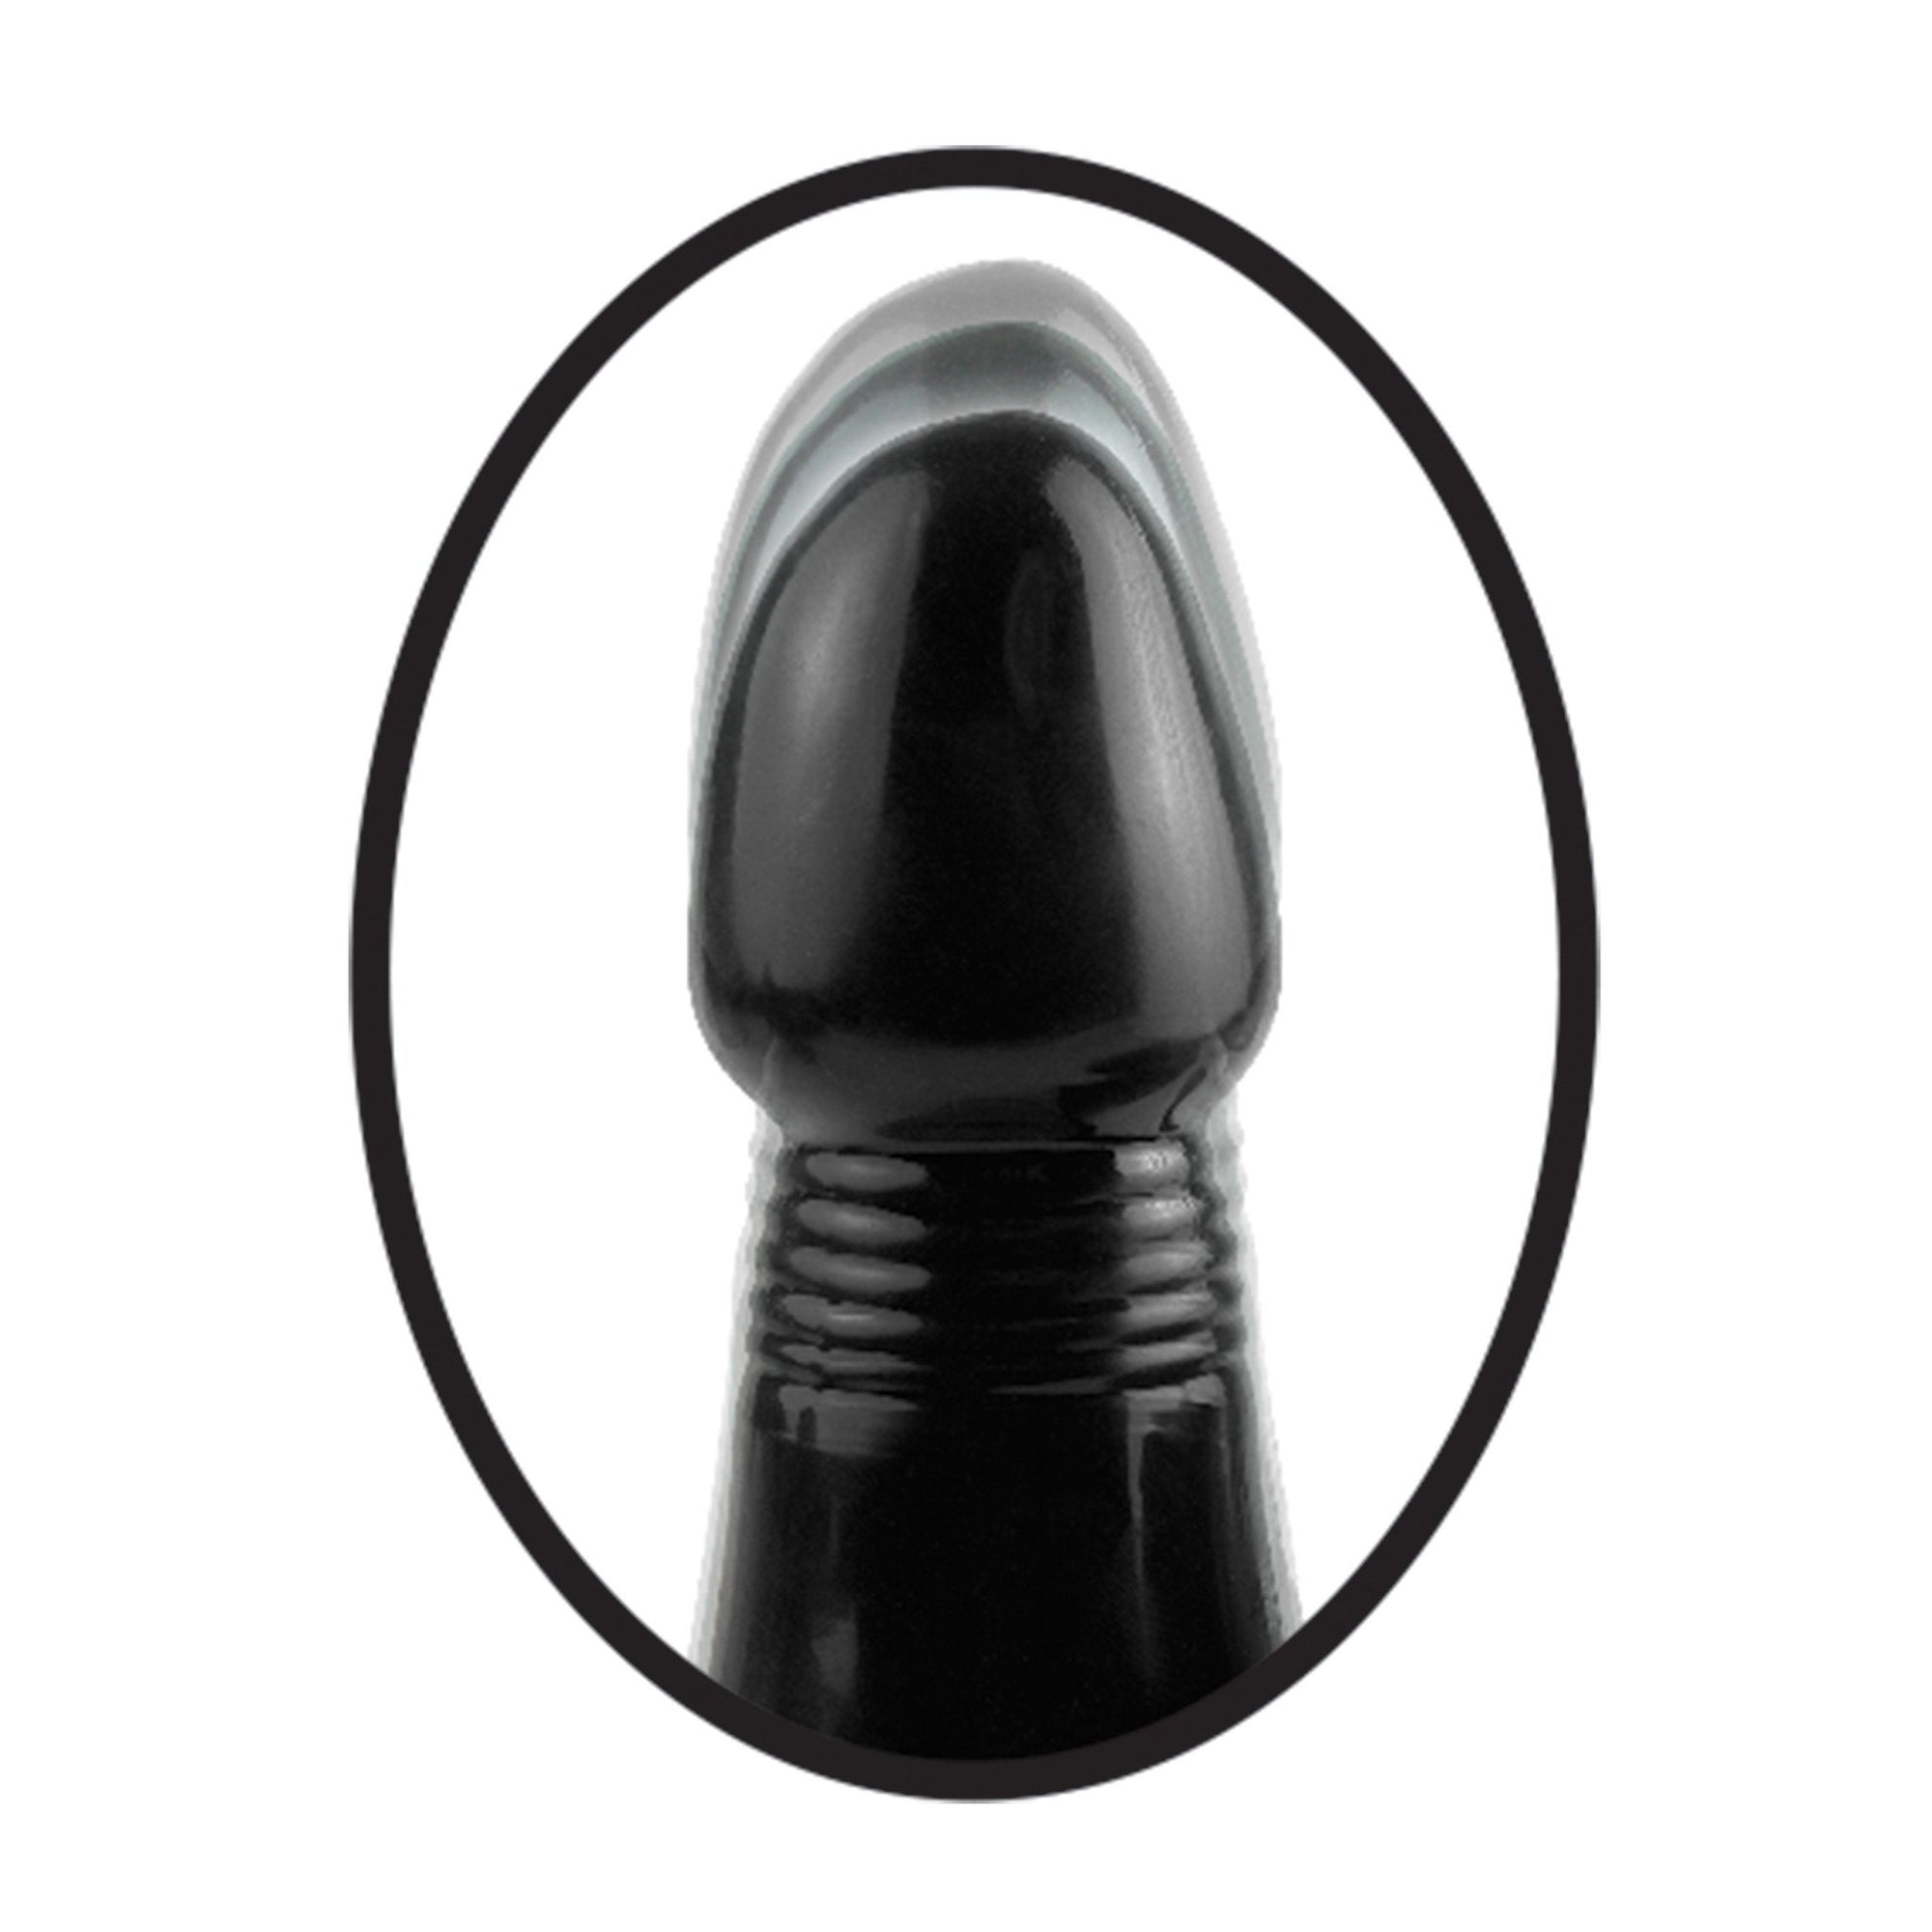 Pipedream - Anal Fastasy Collection Vibrating Thruster Butt Plug (Black) - PleasureHobby Singapore